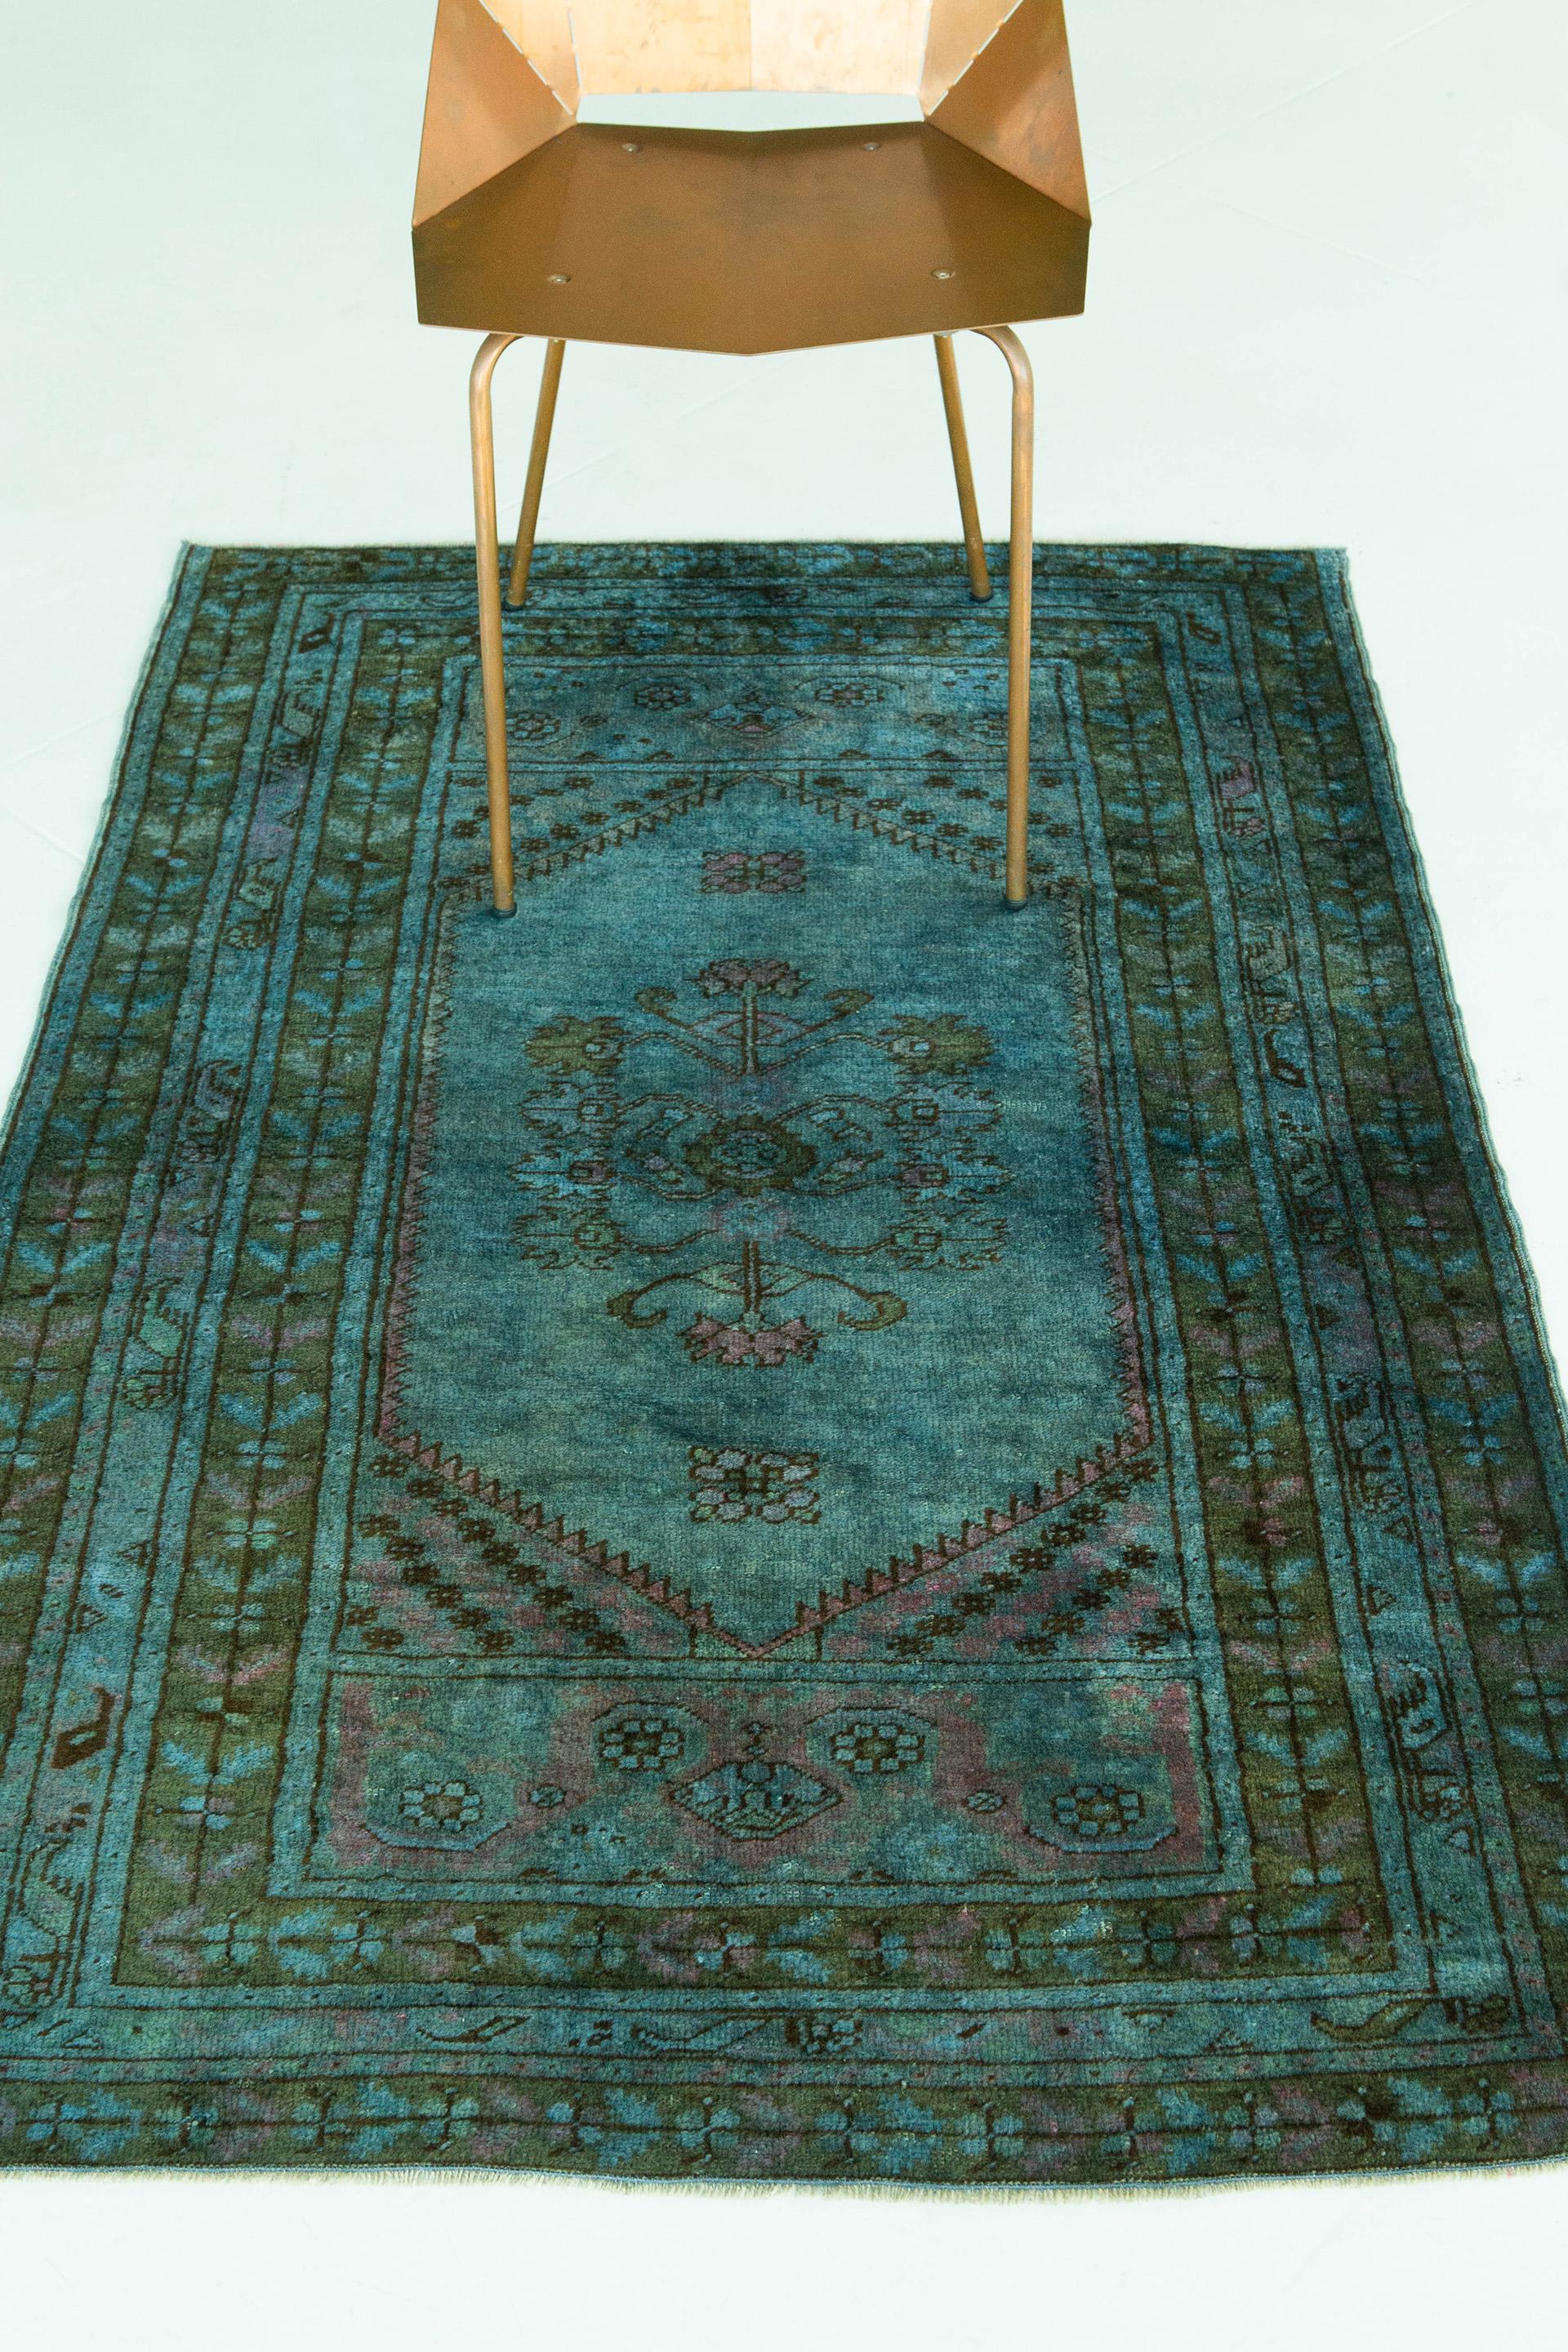 A Vintage blue Turkish Anatolian overdyed rug that will bring personality to any space. Anatolian rugs weave together dyes and colours, motifs, textures and techniques that are popular in Anatolia or Asia Minor. Such techniques include the central